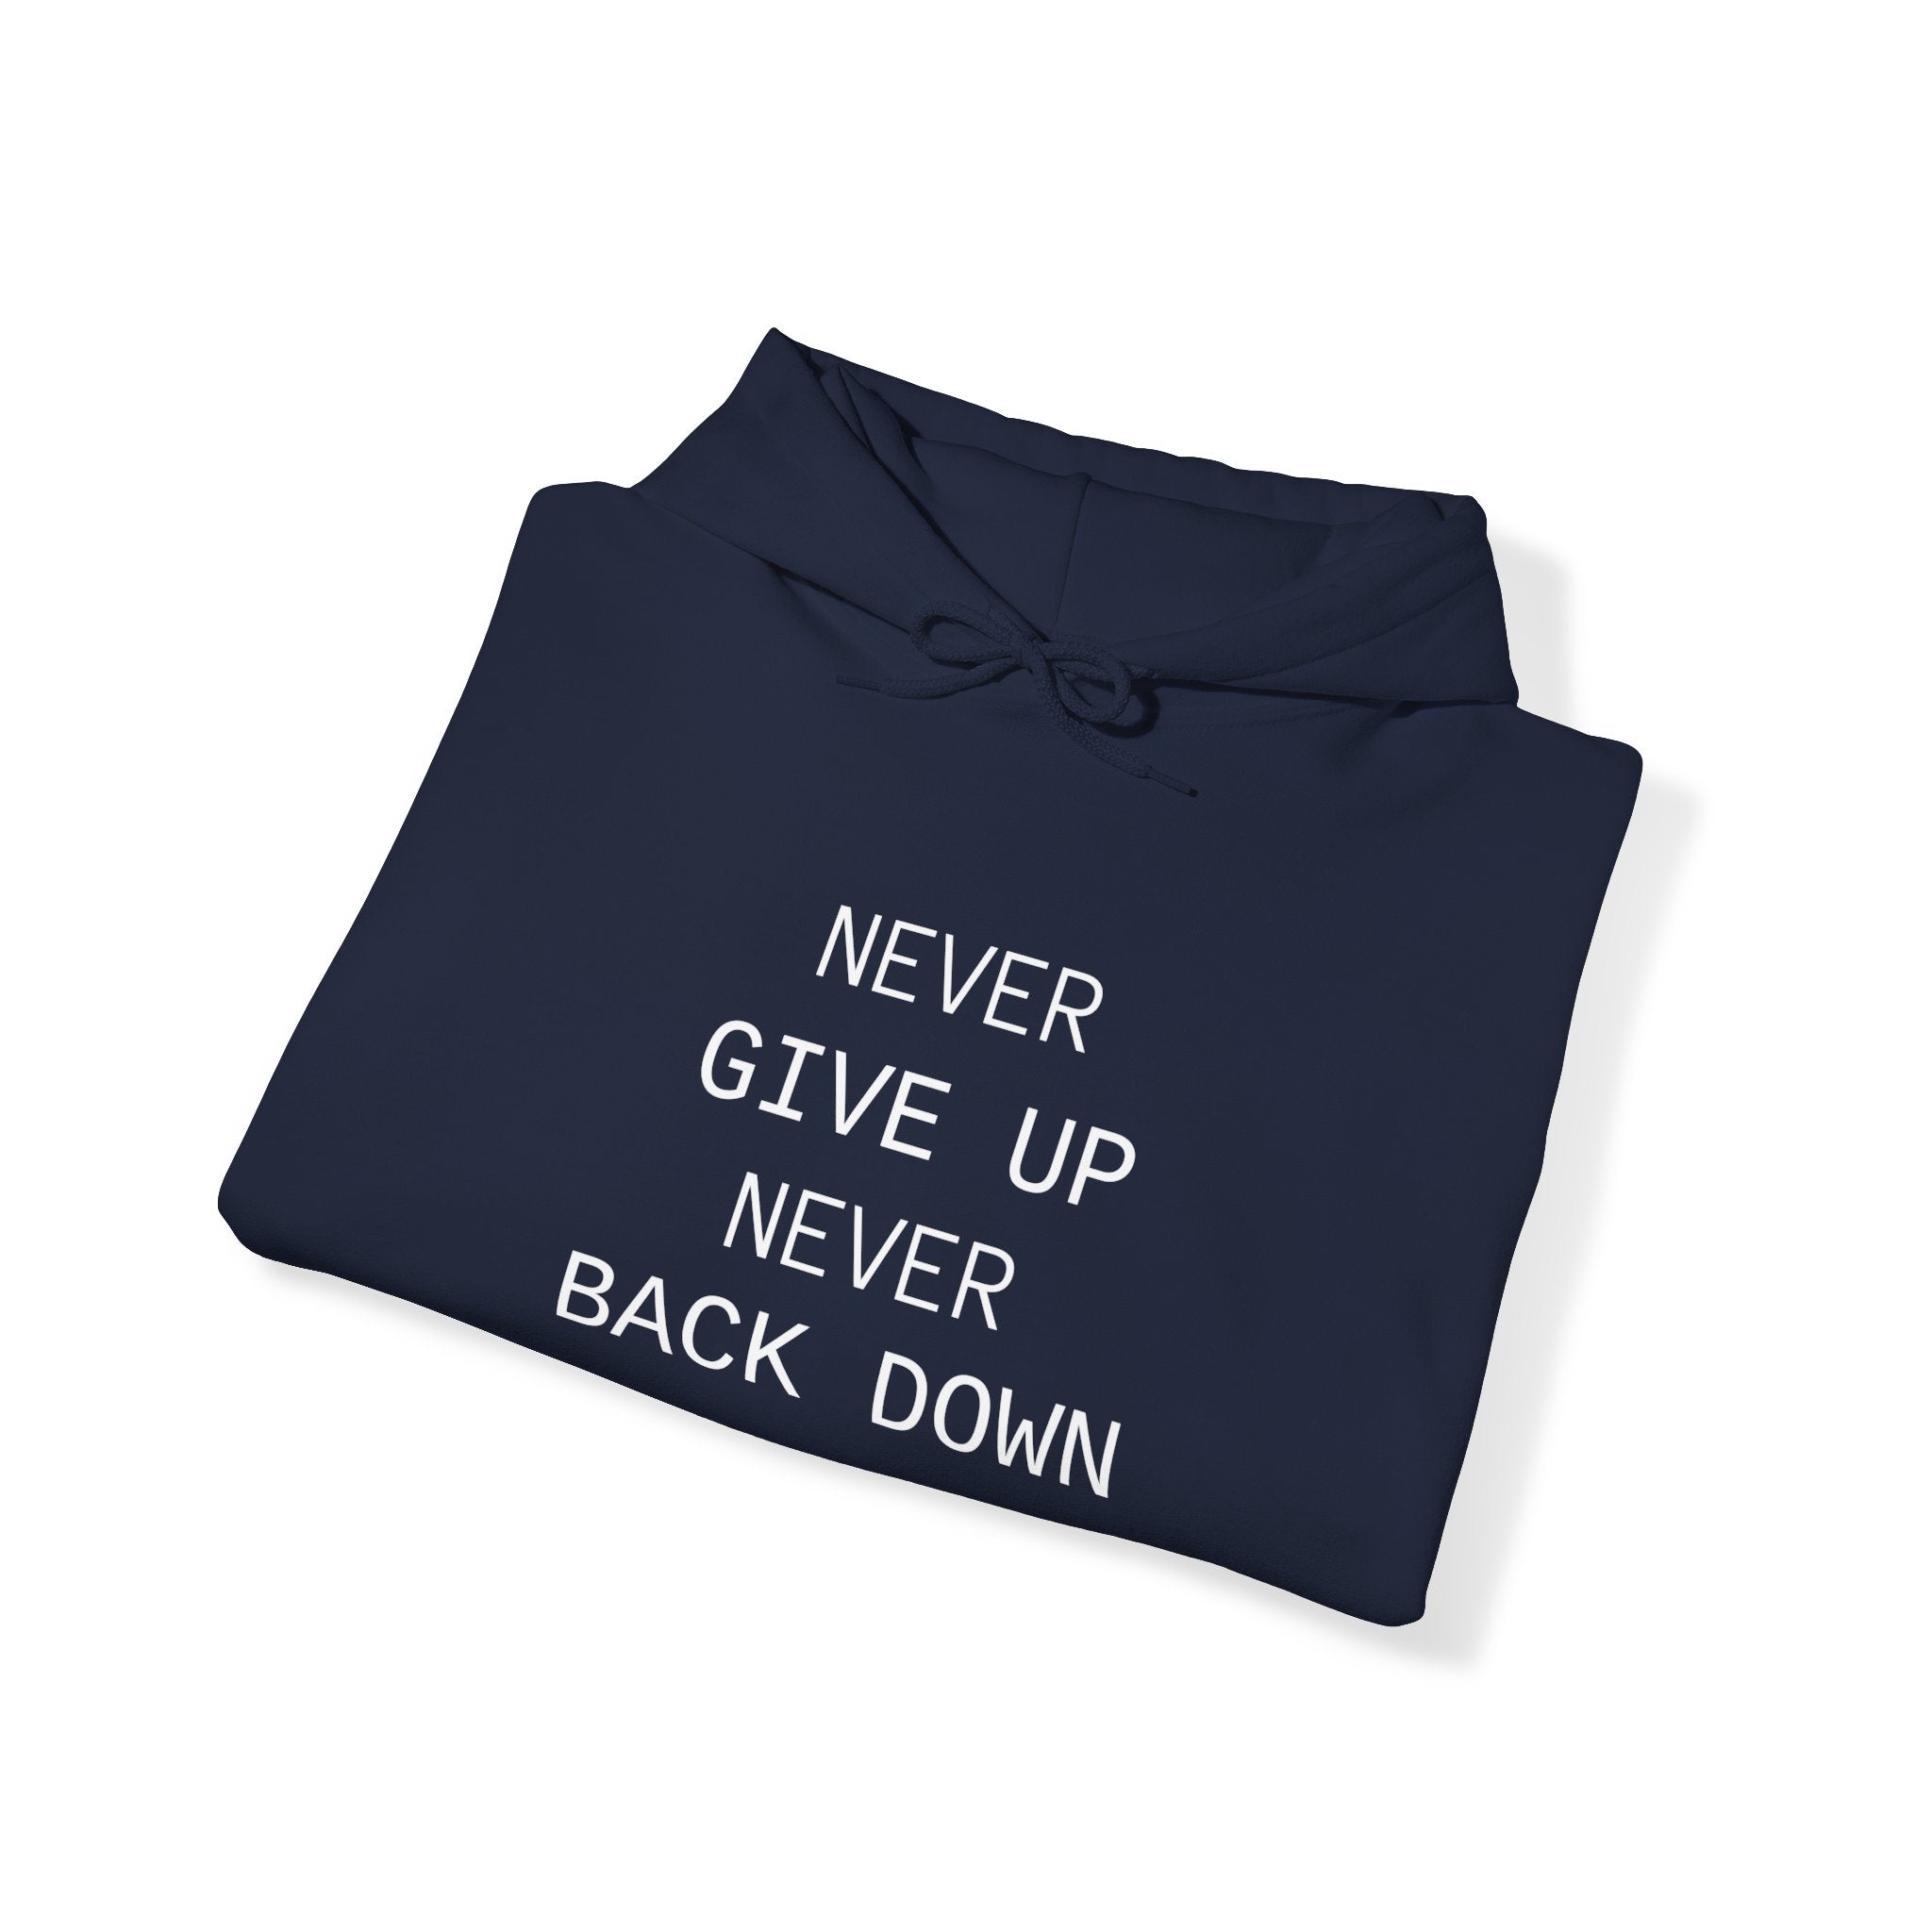 Never Give Up Never Back Down Hooded Sweatshirt